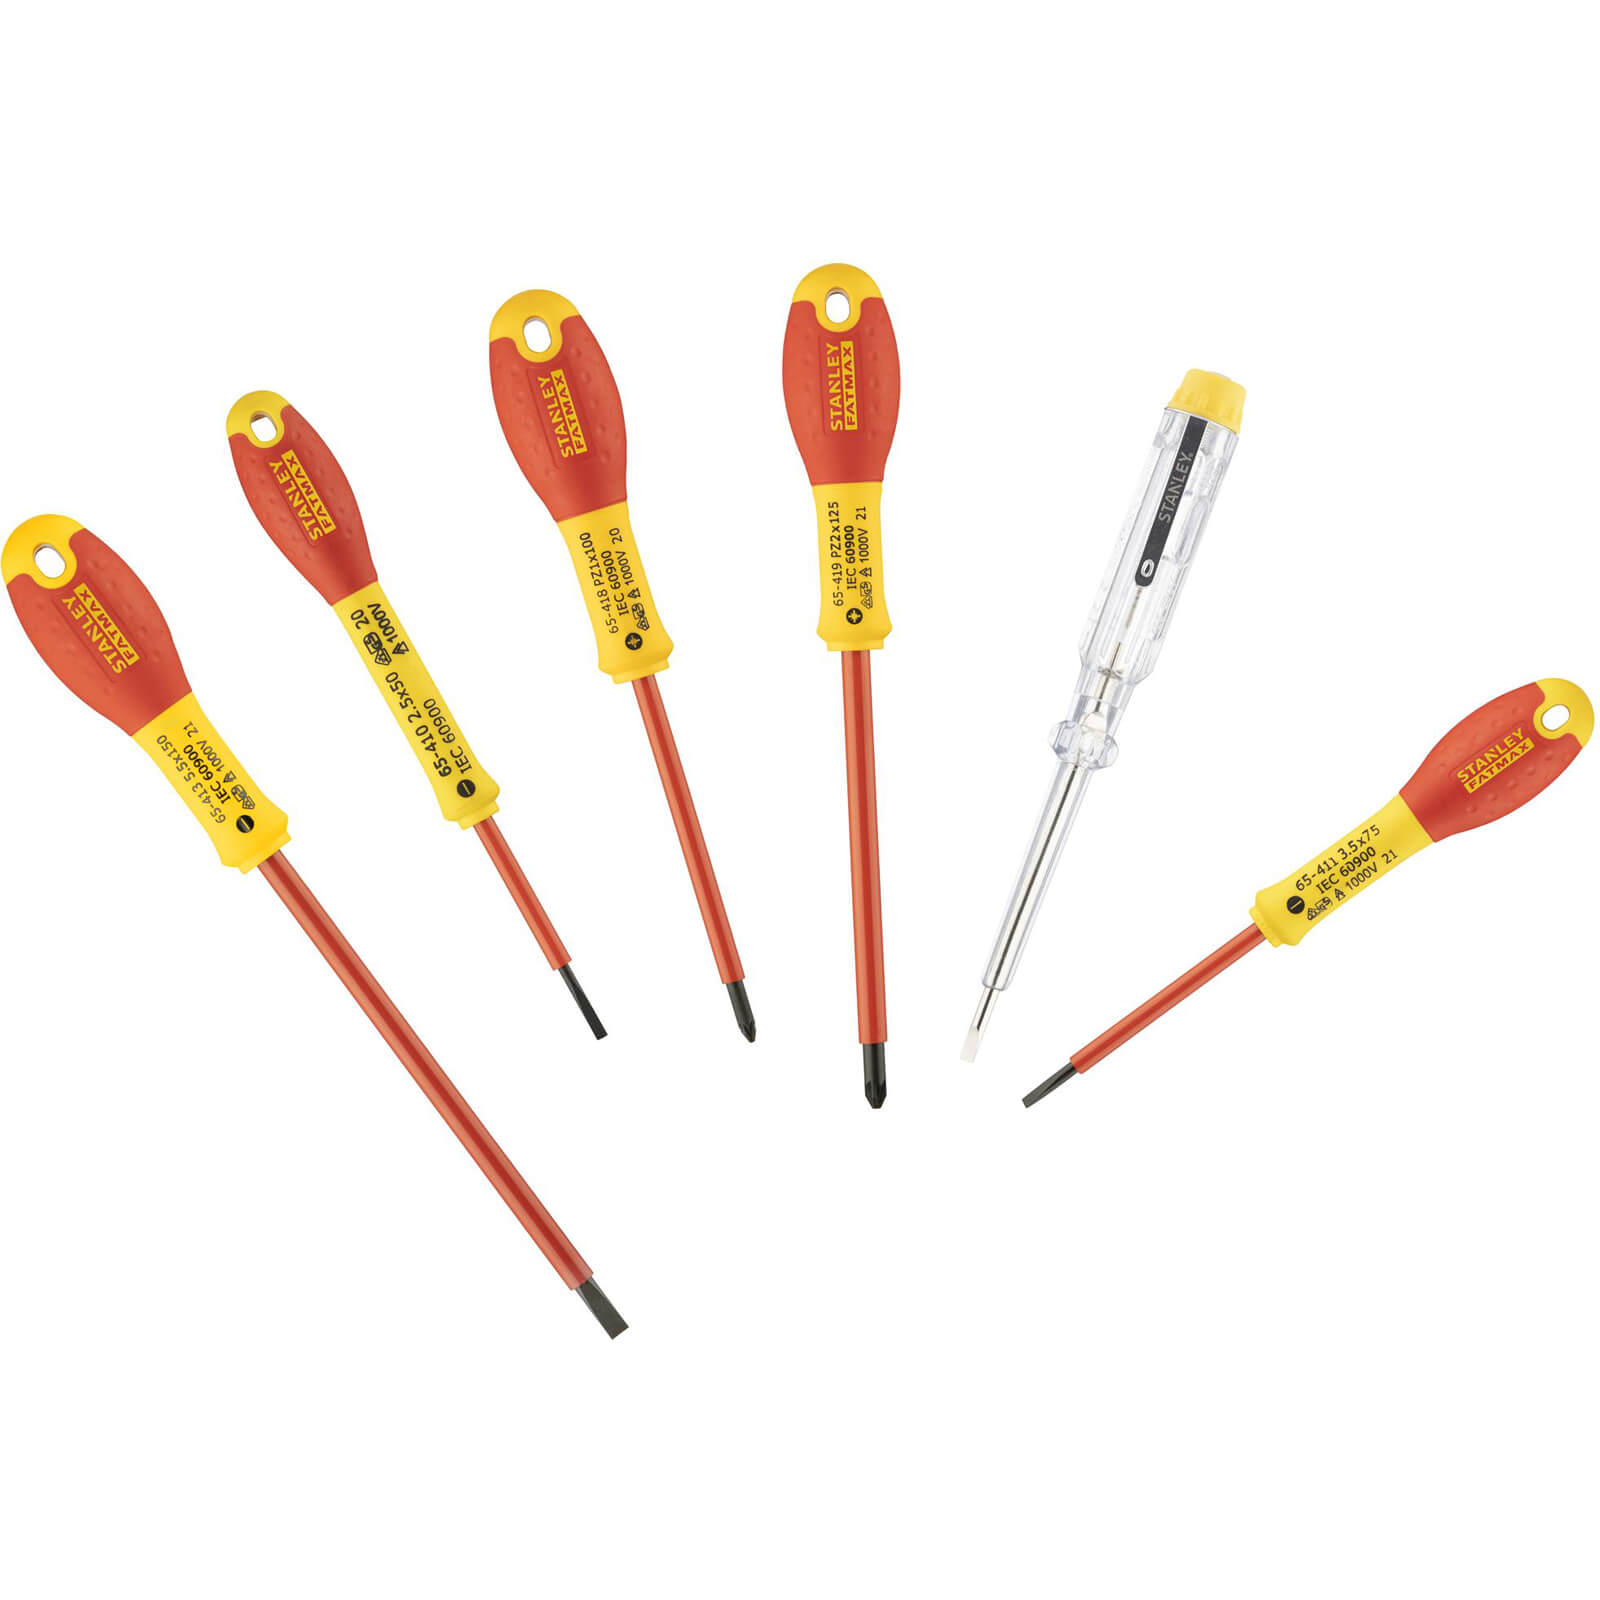 Stanley FatMax 6 Piece VDE Insulated Mixed Screwdriver Set Parallel / Pozi / Tester